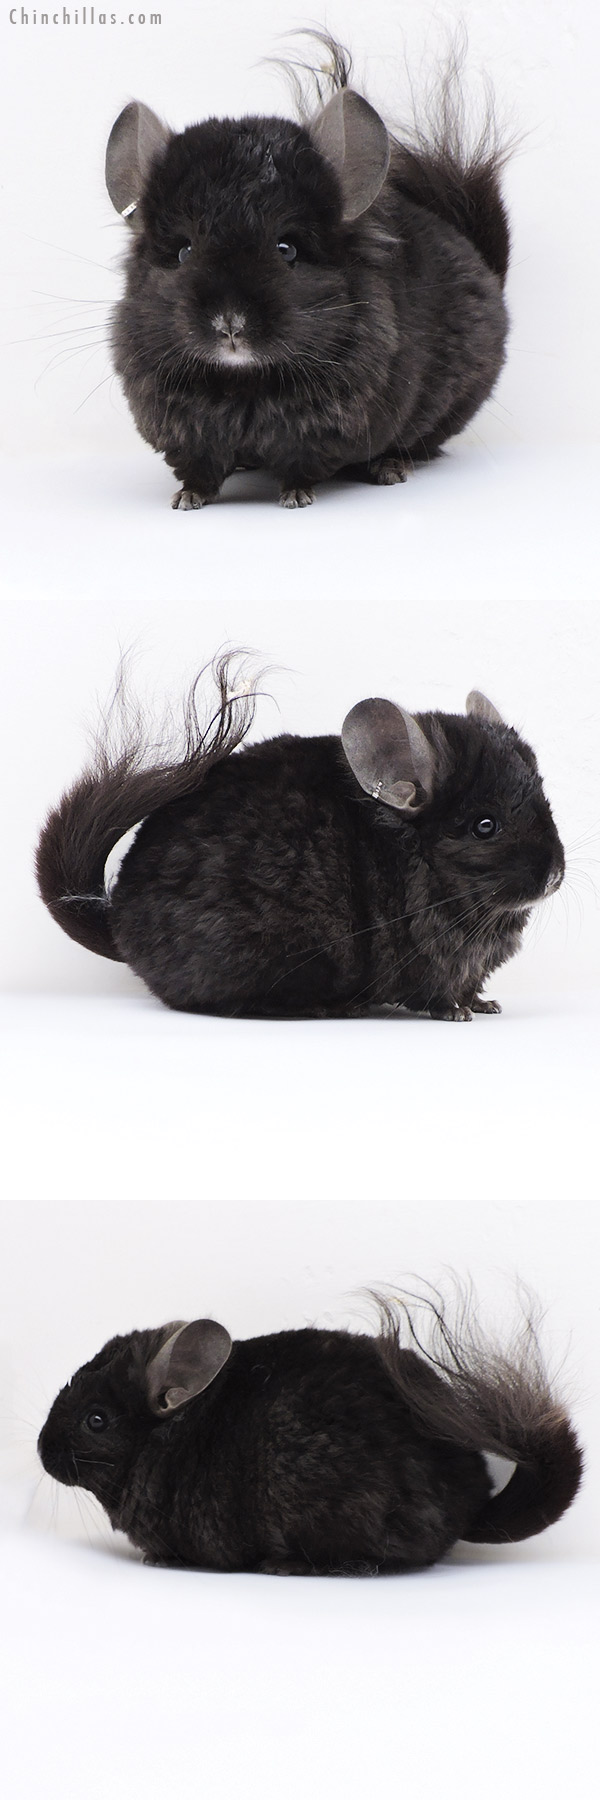 Chinchilla or related item offered for sale or export on Chinchillas.com - 18067 Ebony  Royal Imperial Angora Male Chinchilla